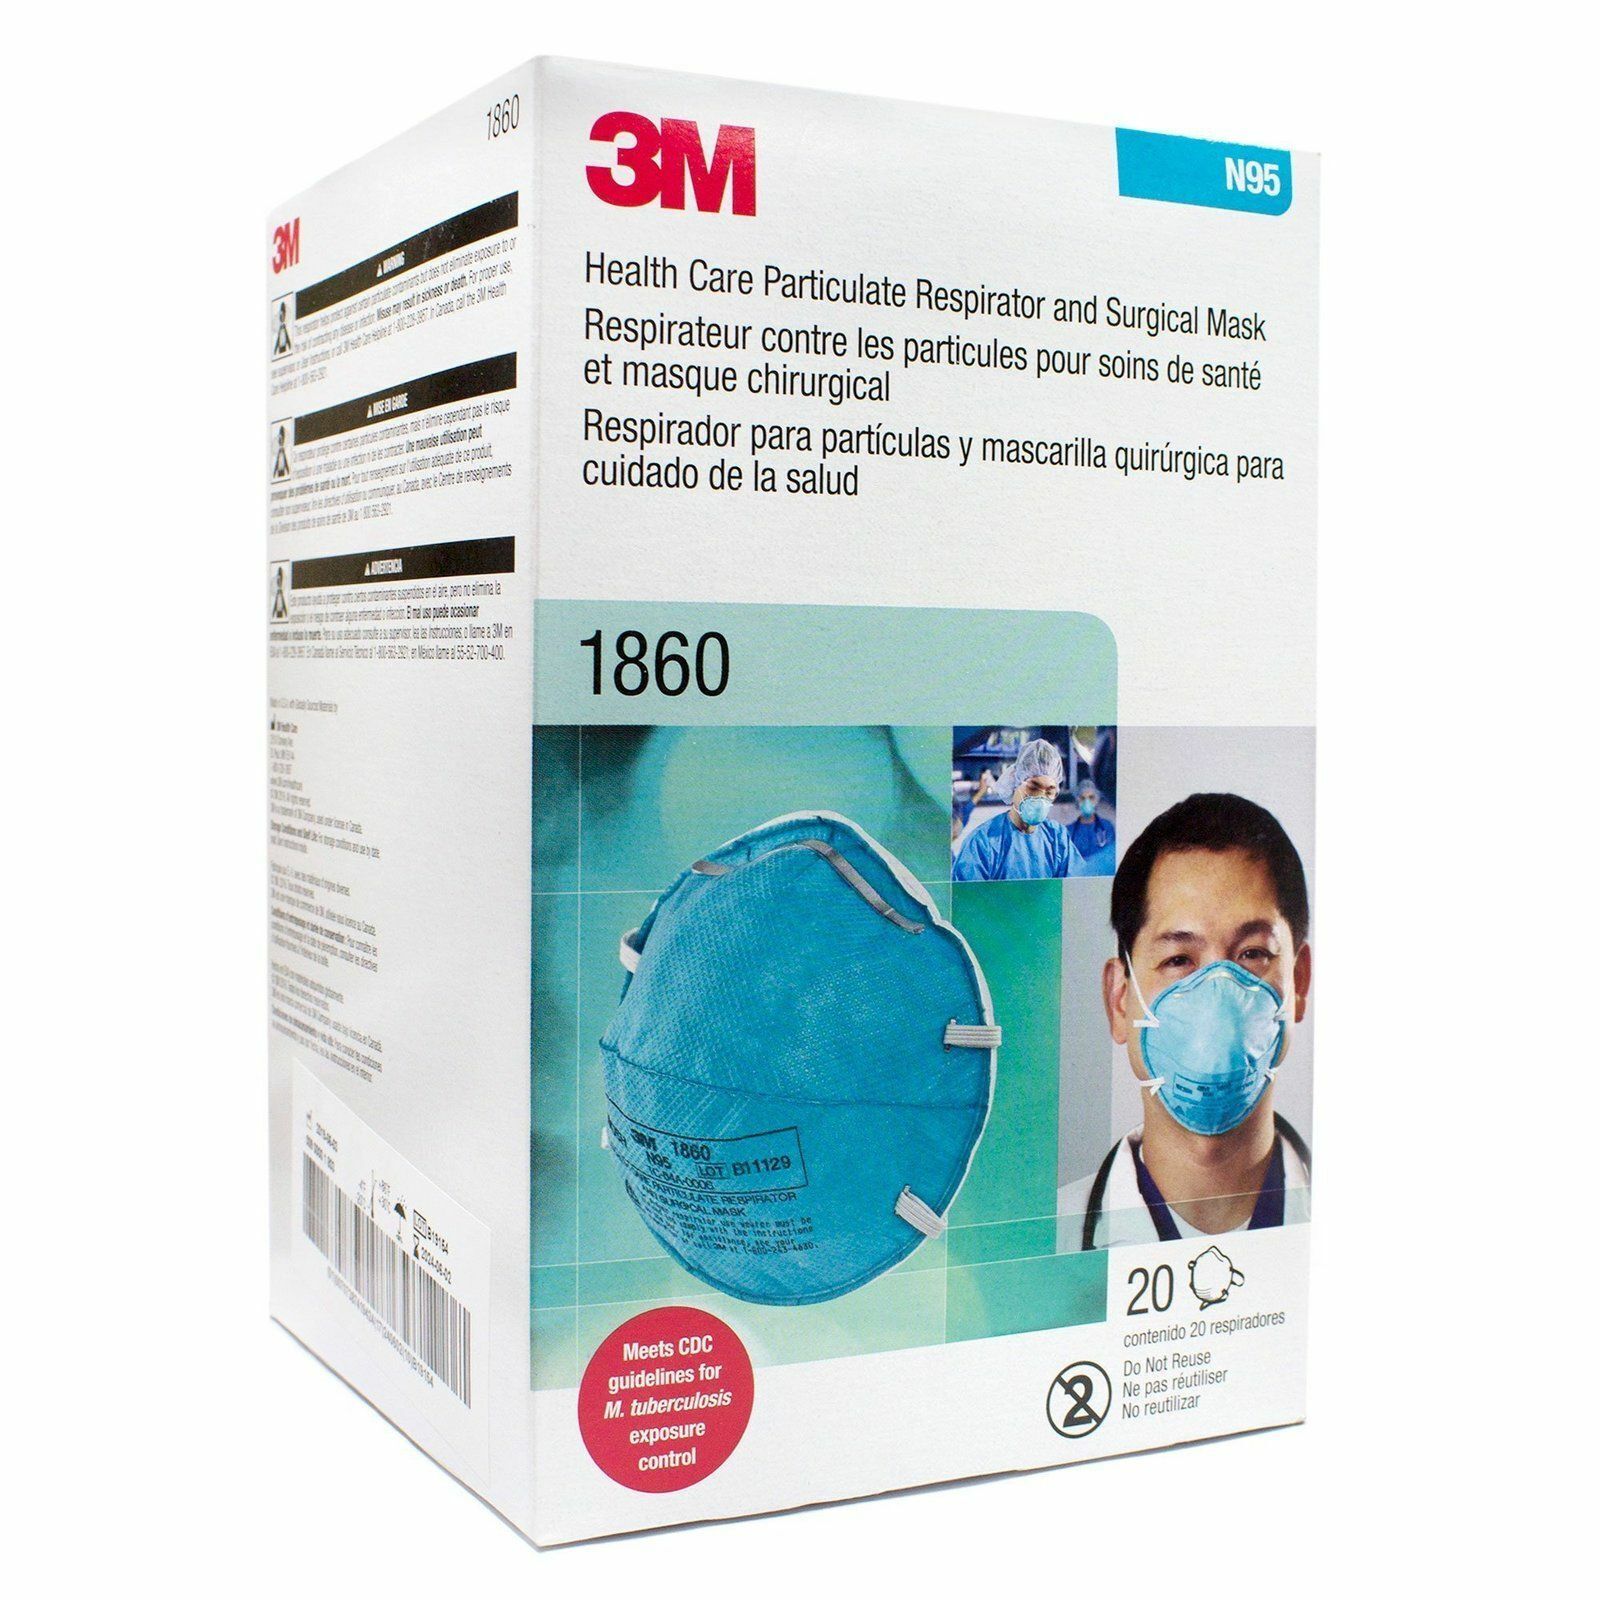 *20-Pieces* 3M N95 Health Care Particulate Respirator Surgical Face Mask 1860 3M 3M 1860